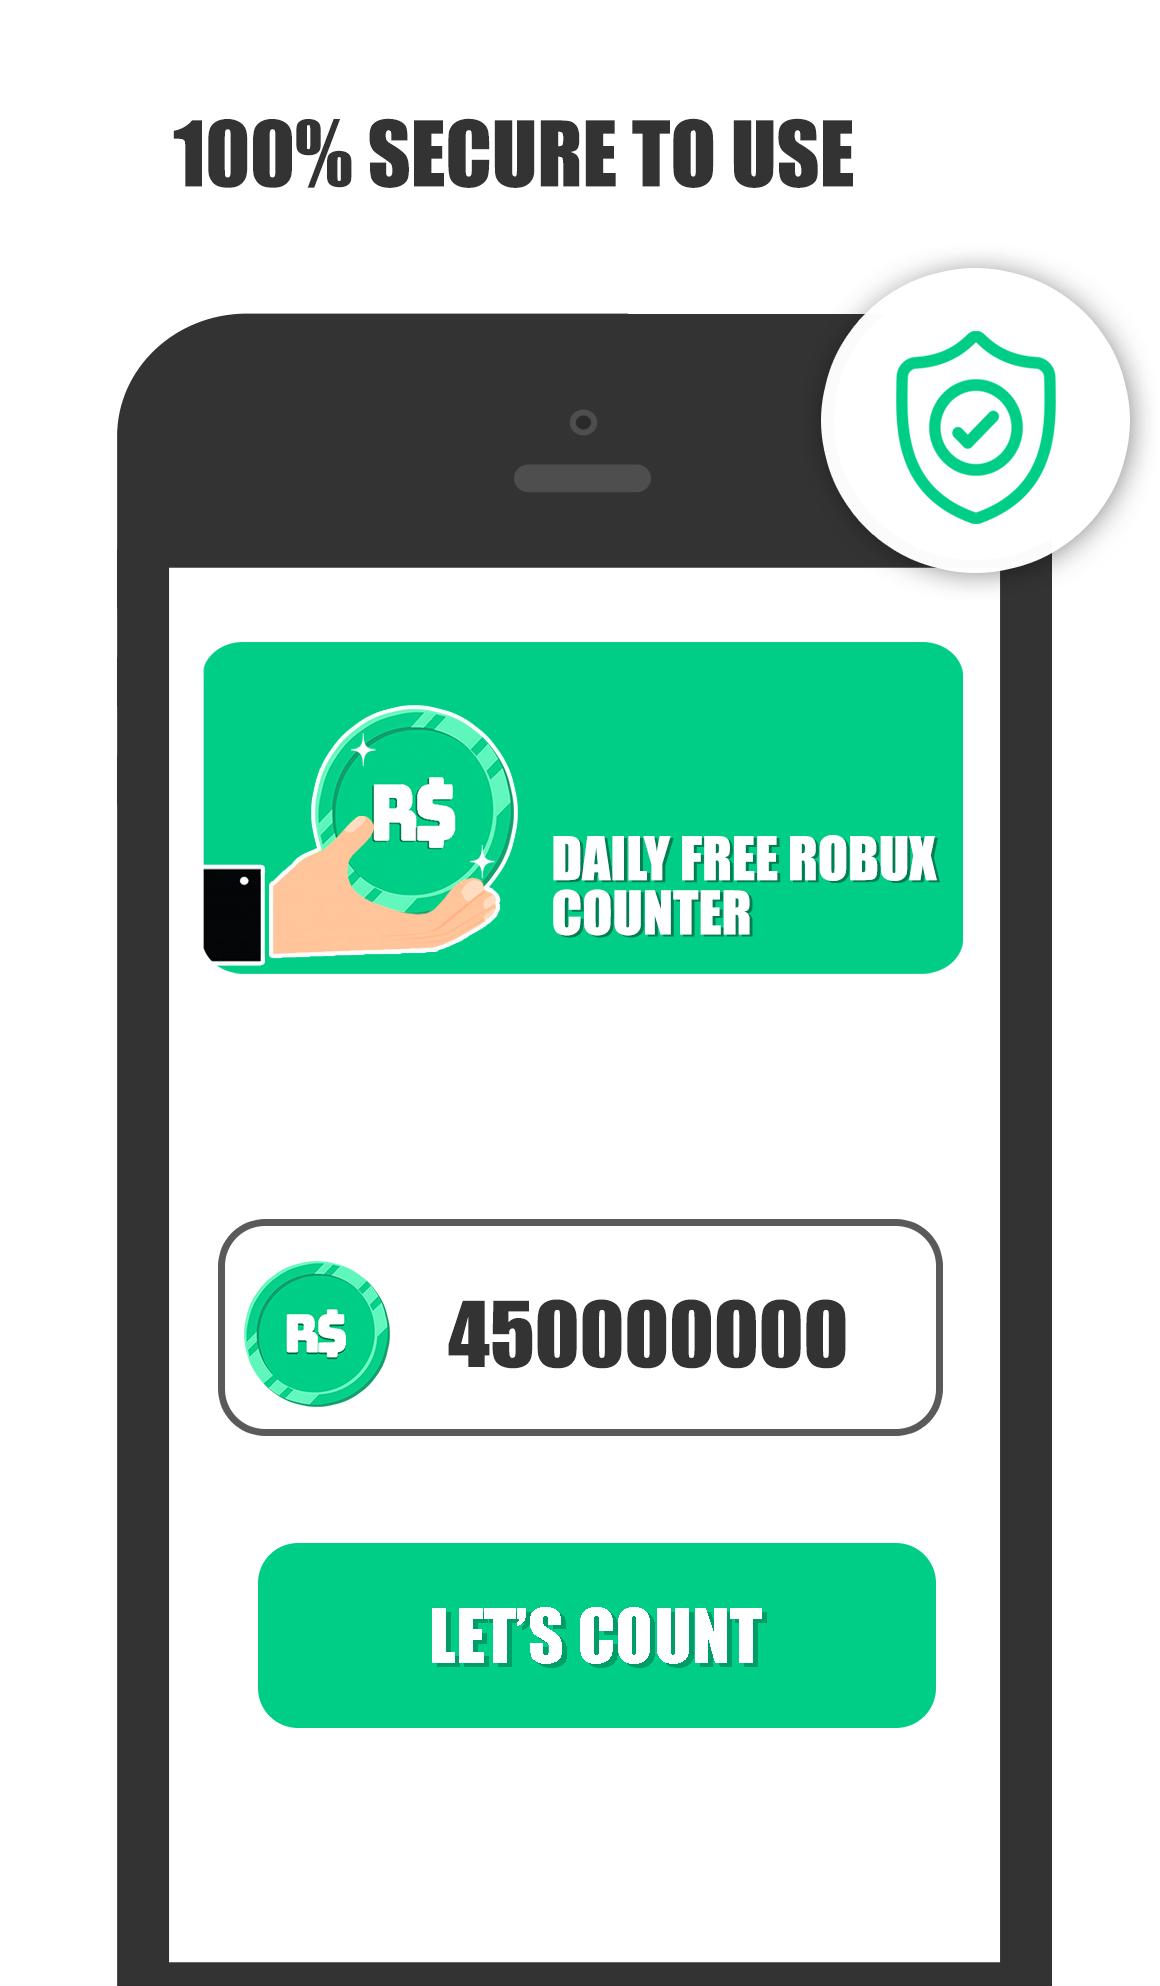 Daily Free Robux Counter For Roblox For Android Apk Download - free robux counter for roblox 2019 apk download latest android